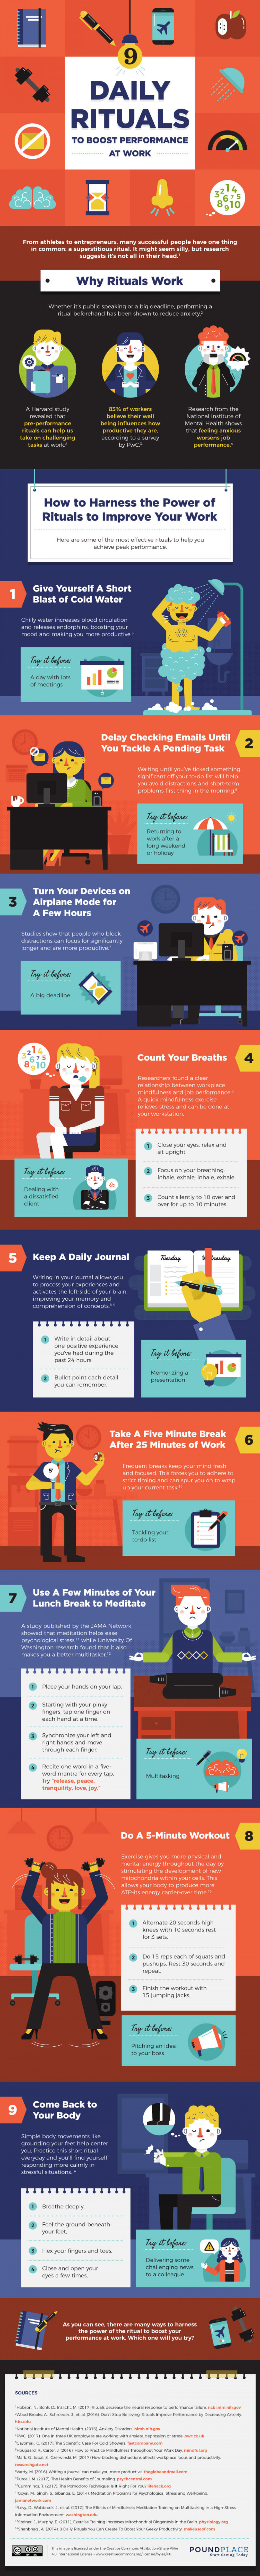 9 Daily Rituals To Boost Performance At Work Infographic